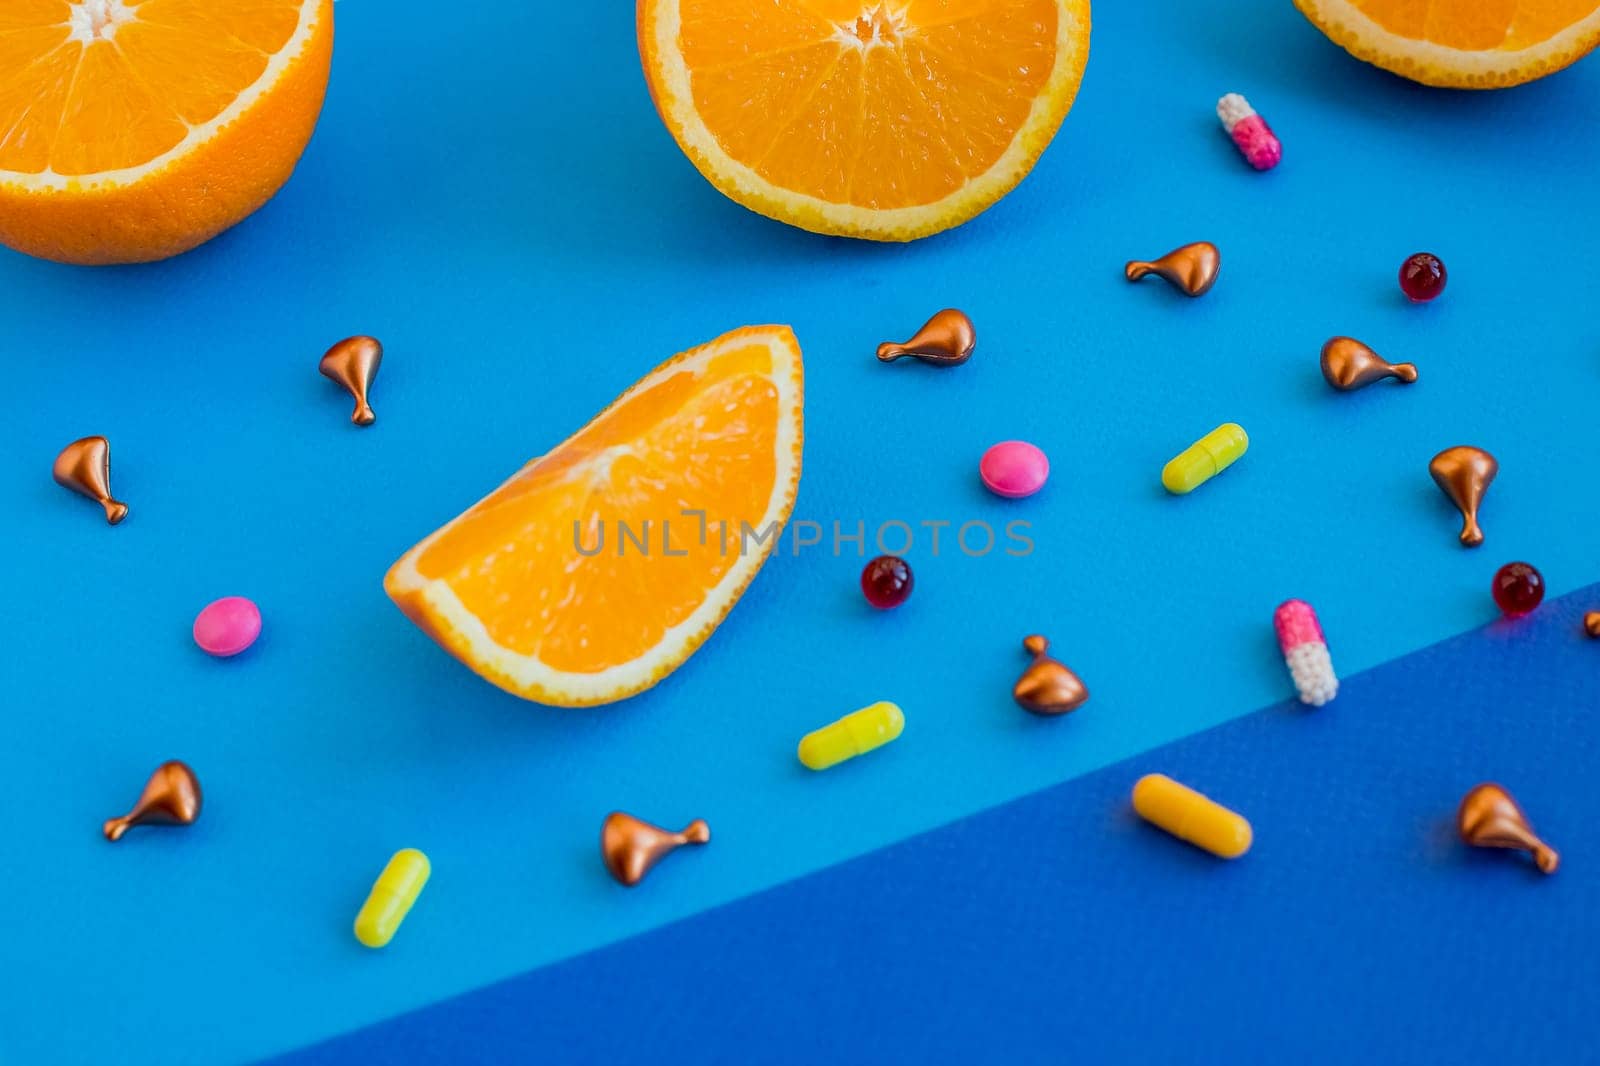 Multivitamins and supplements with fresh orange on blue background.Healthy concept image. vitamin C supplement: fresh orange, orange juice, and effervescent tablet vitamin C. by YuliaYaspe1979